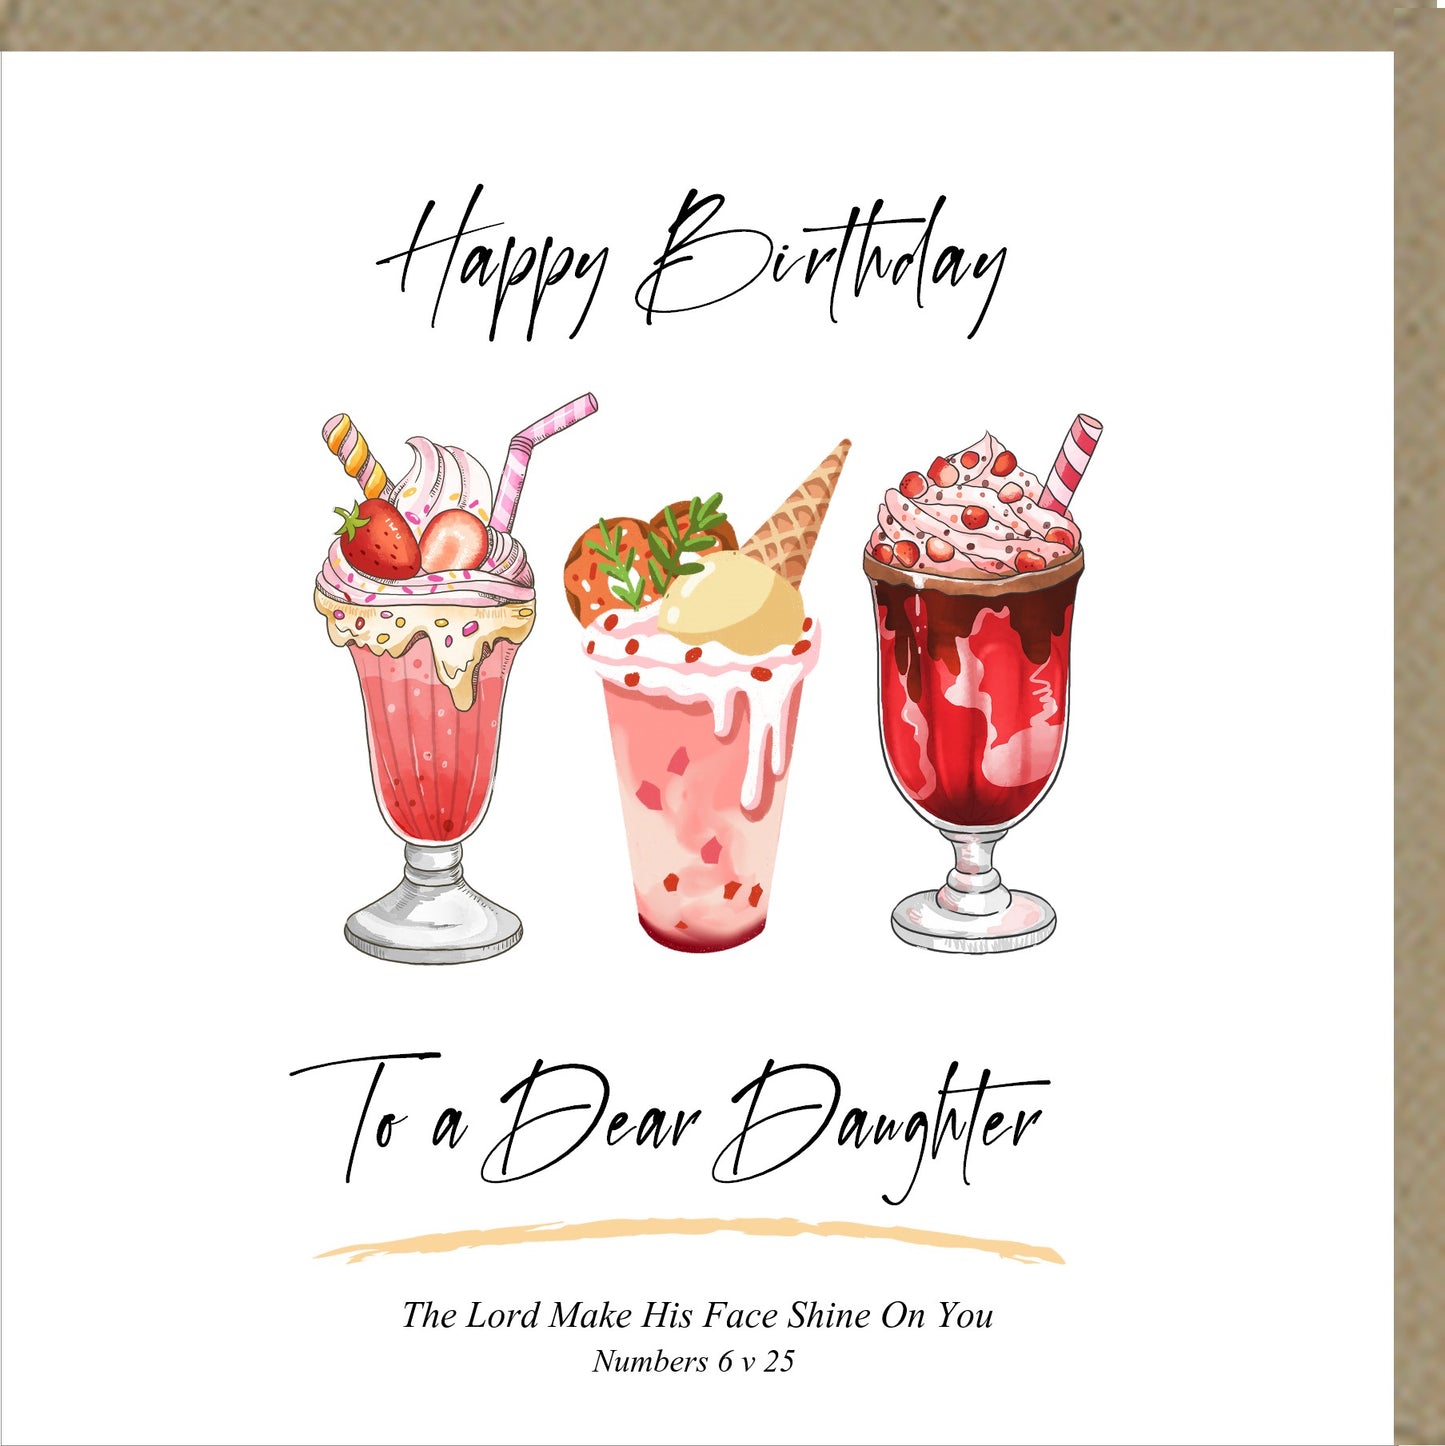 Happy Birthday To A Dear Daughter Greetings Card - The Christian Gift Company